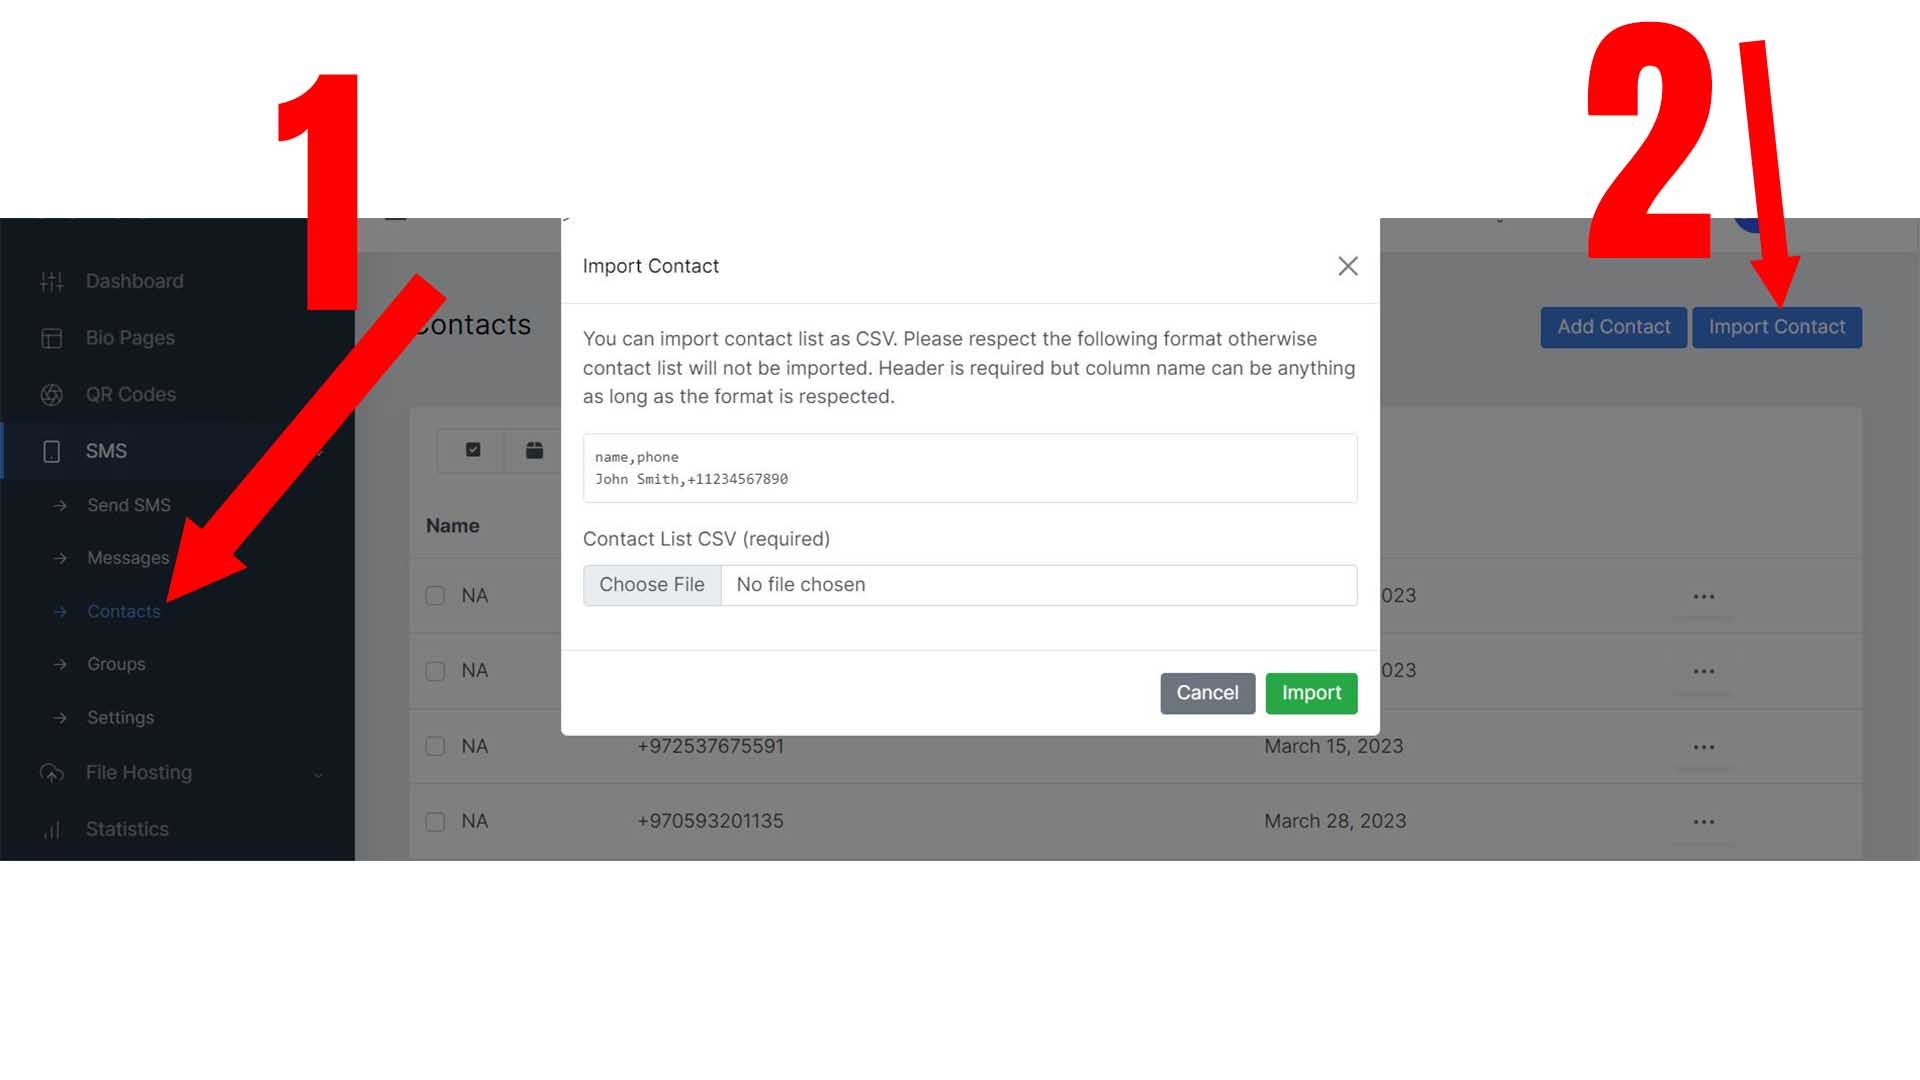 Import your contacts in CSV format to your SMS dashboard